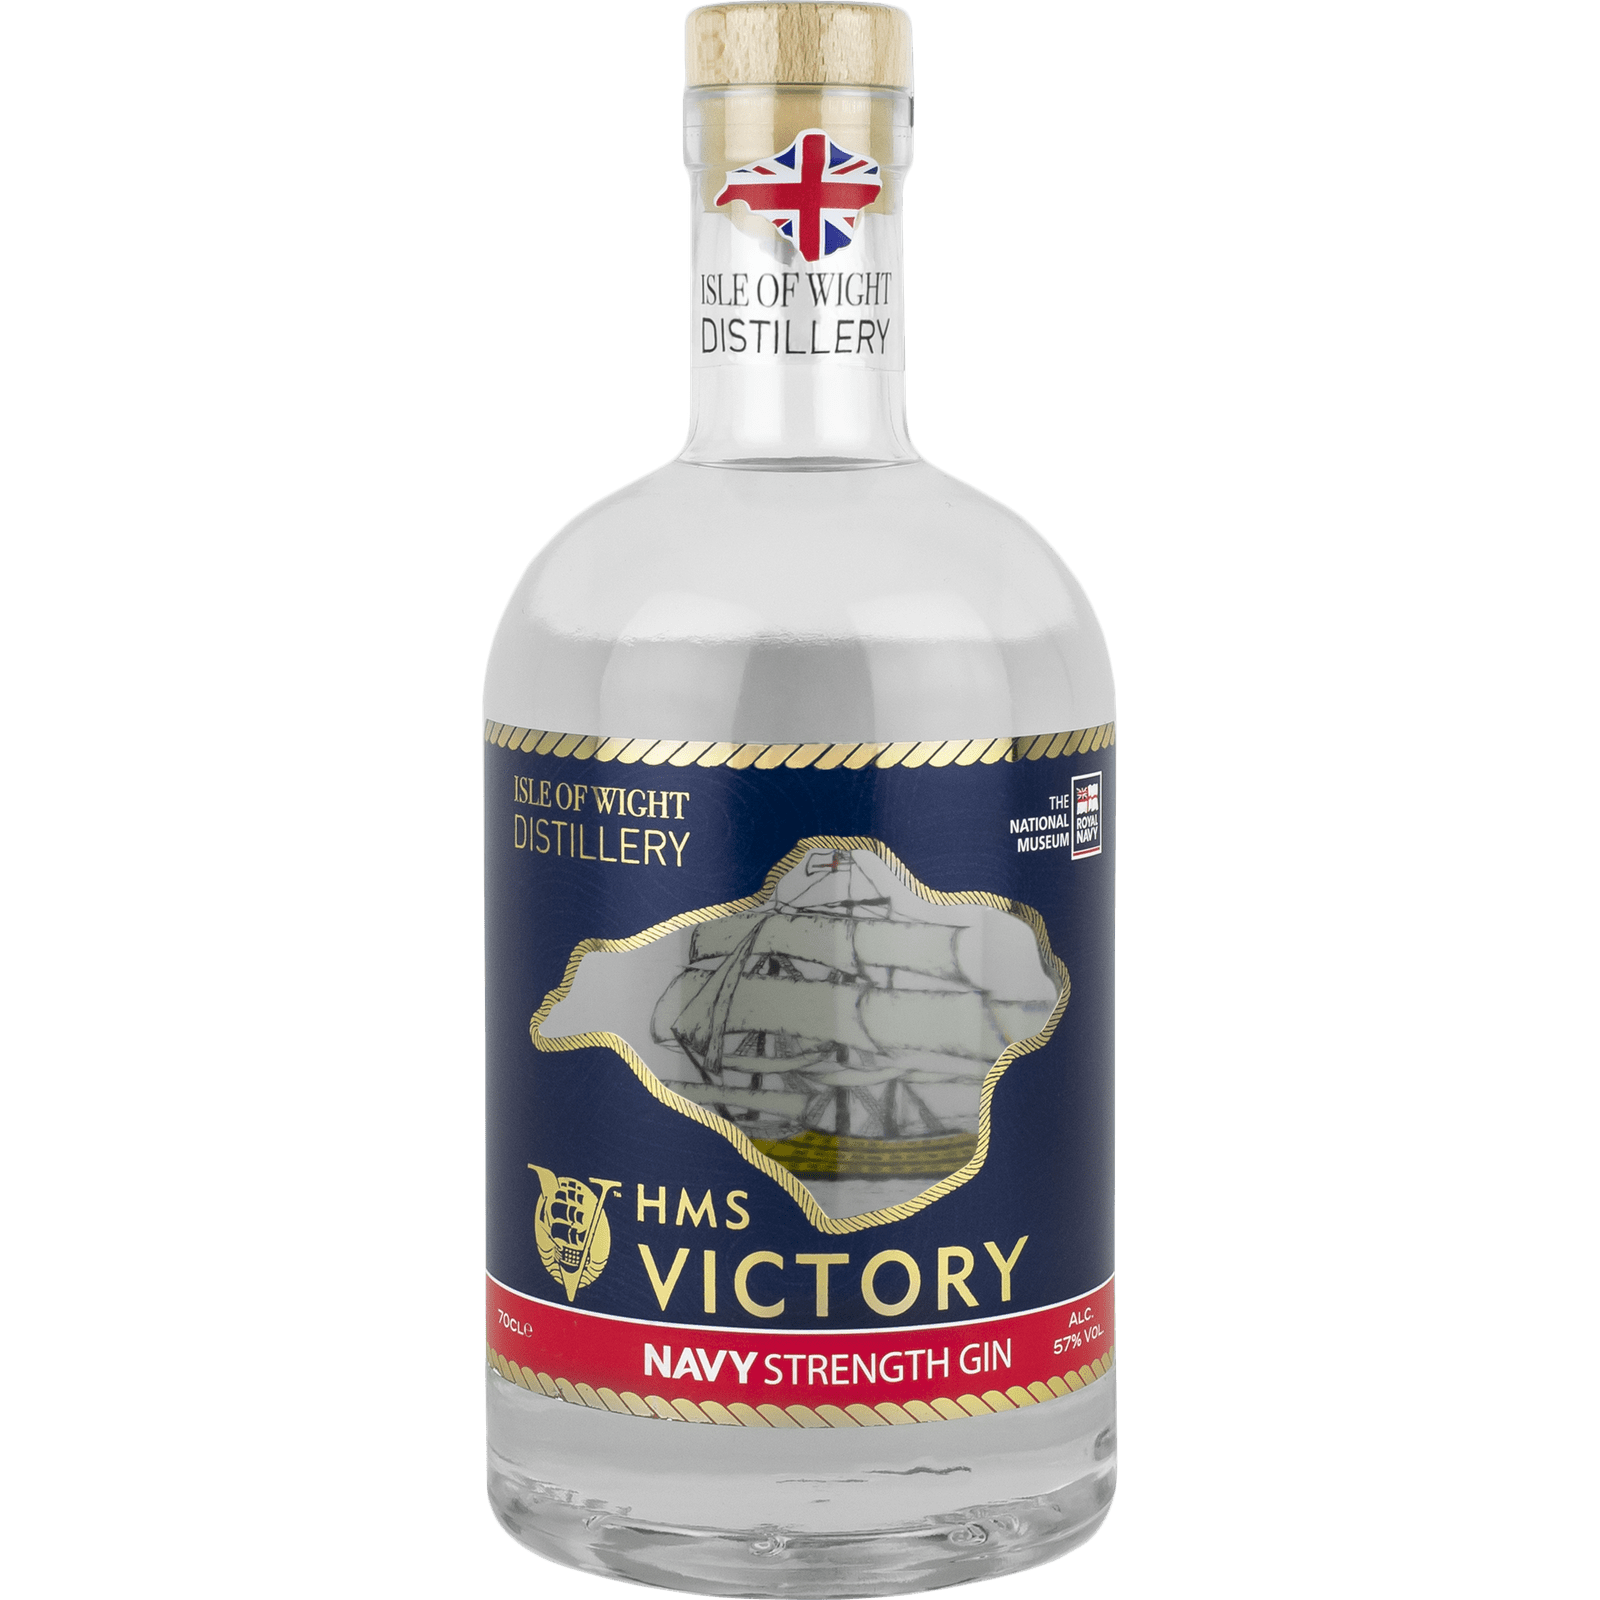 Isle of Wight Distillery HMS Victory Navy Strength Gin 57% - The General Wine Company